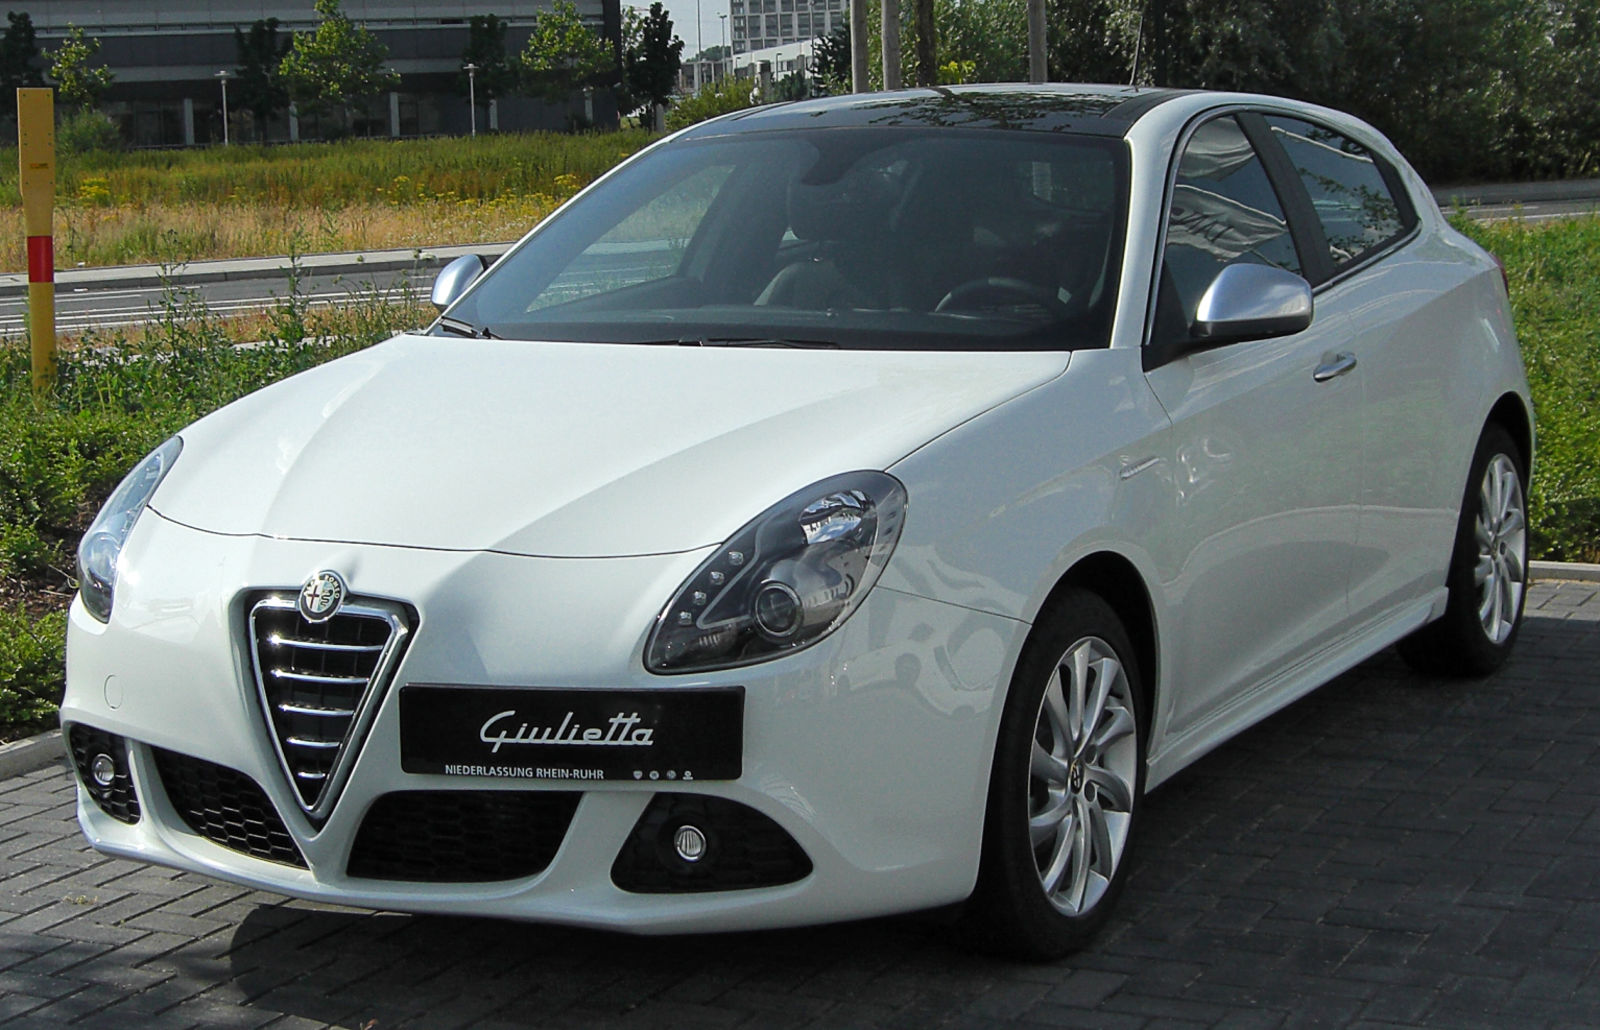 Giulietta for your time